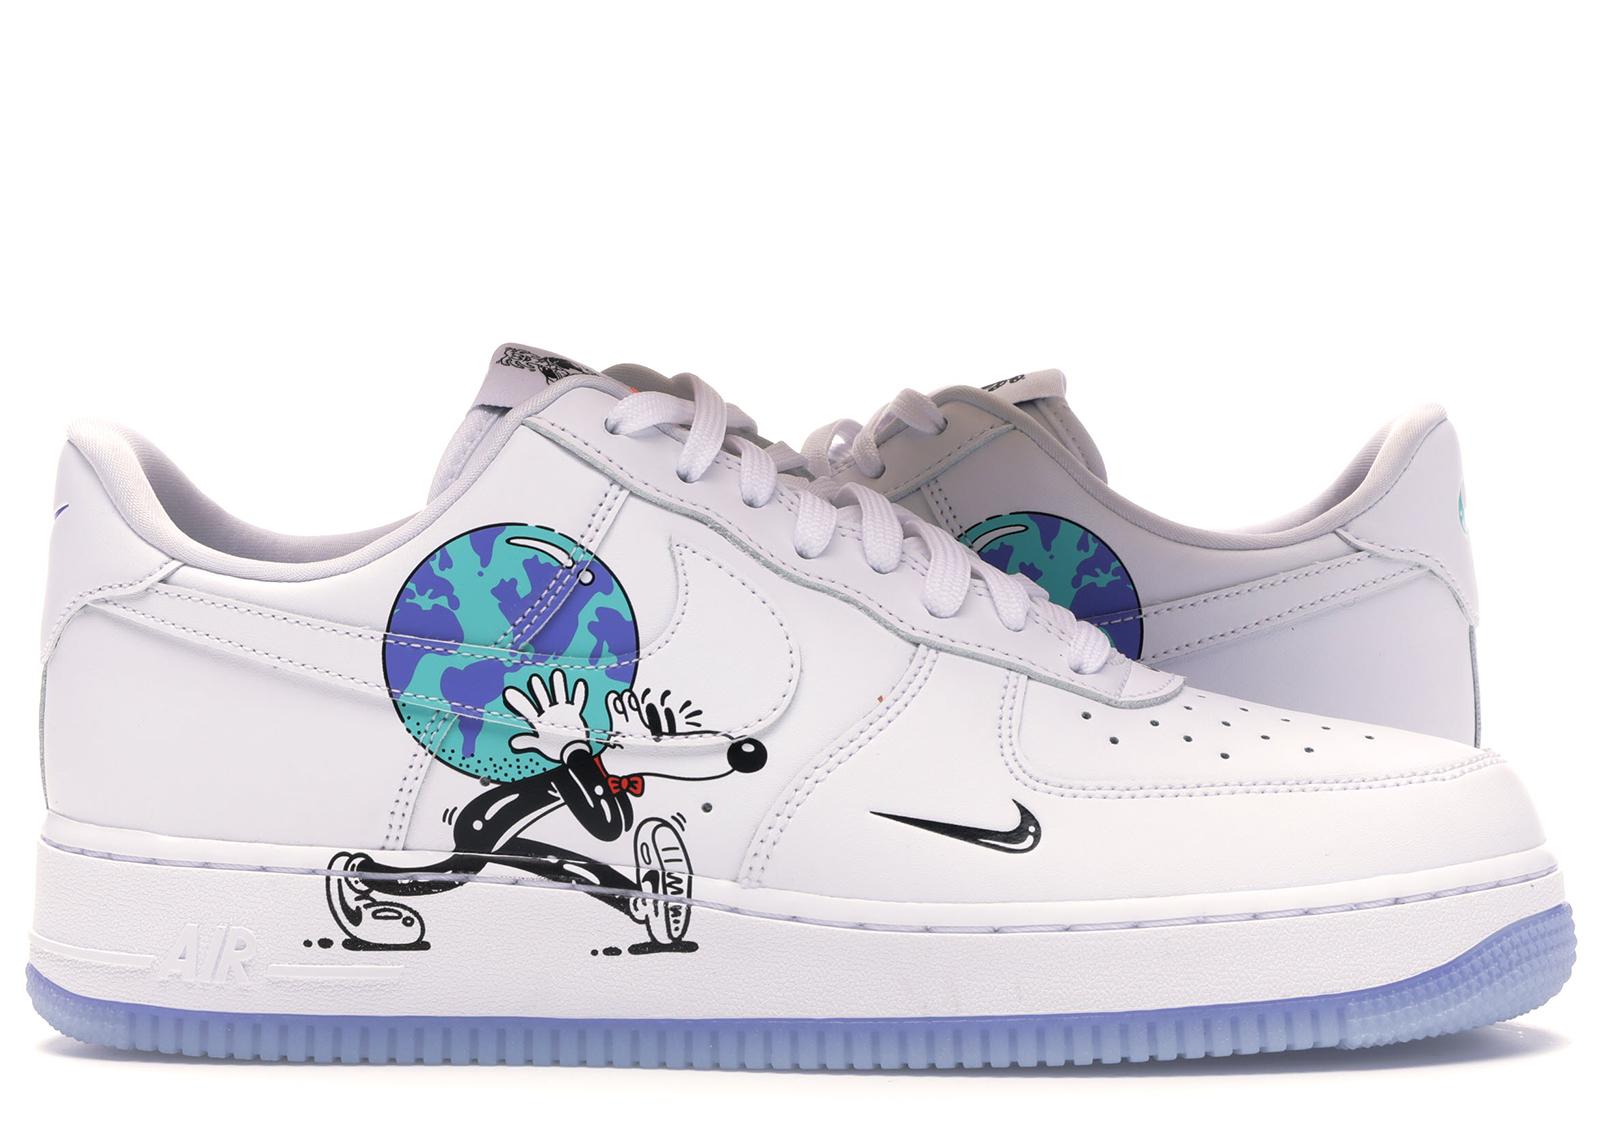 Nike Air Force 1 Flyleather Steve Harrington Earth Day (2019) in White ...